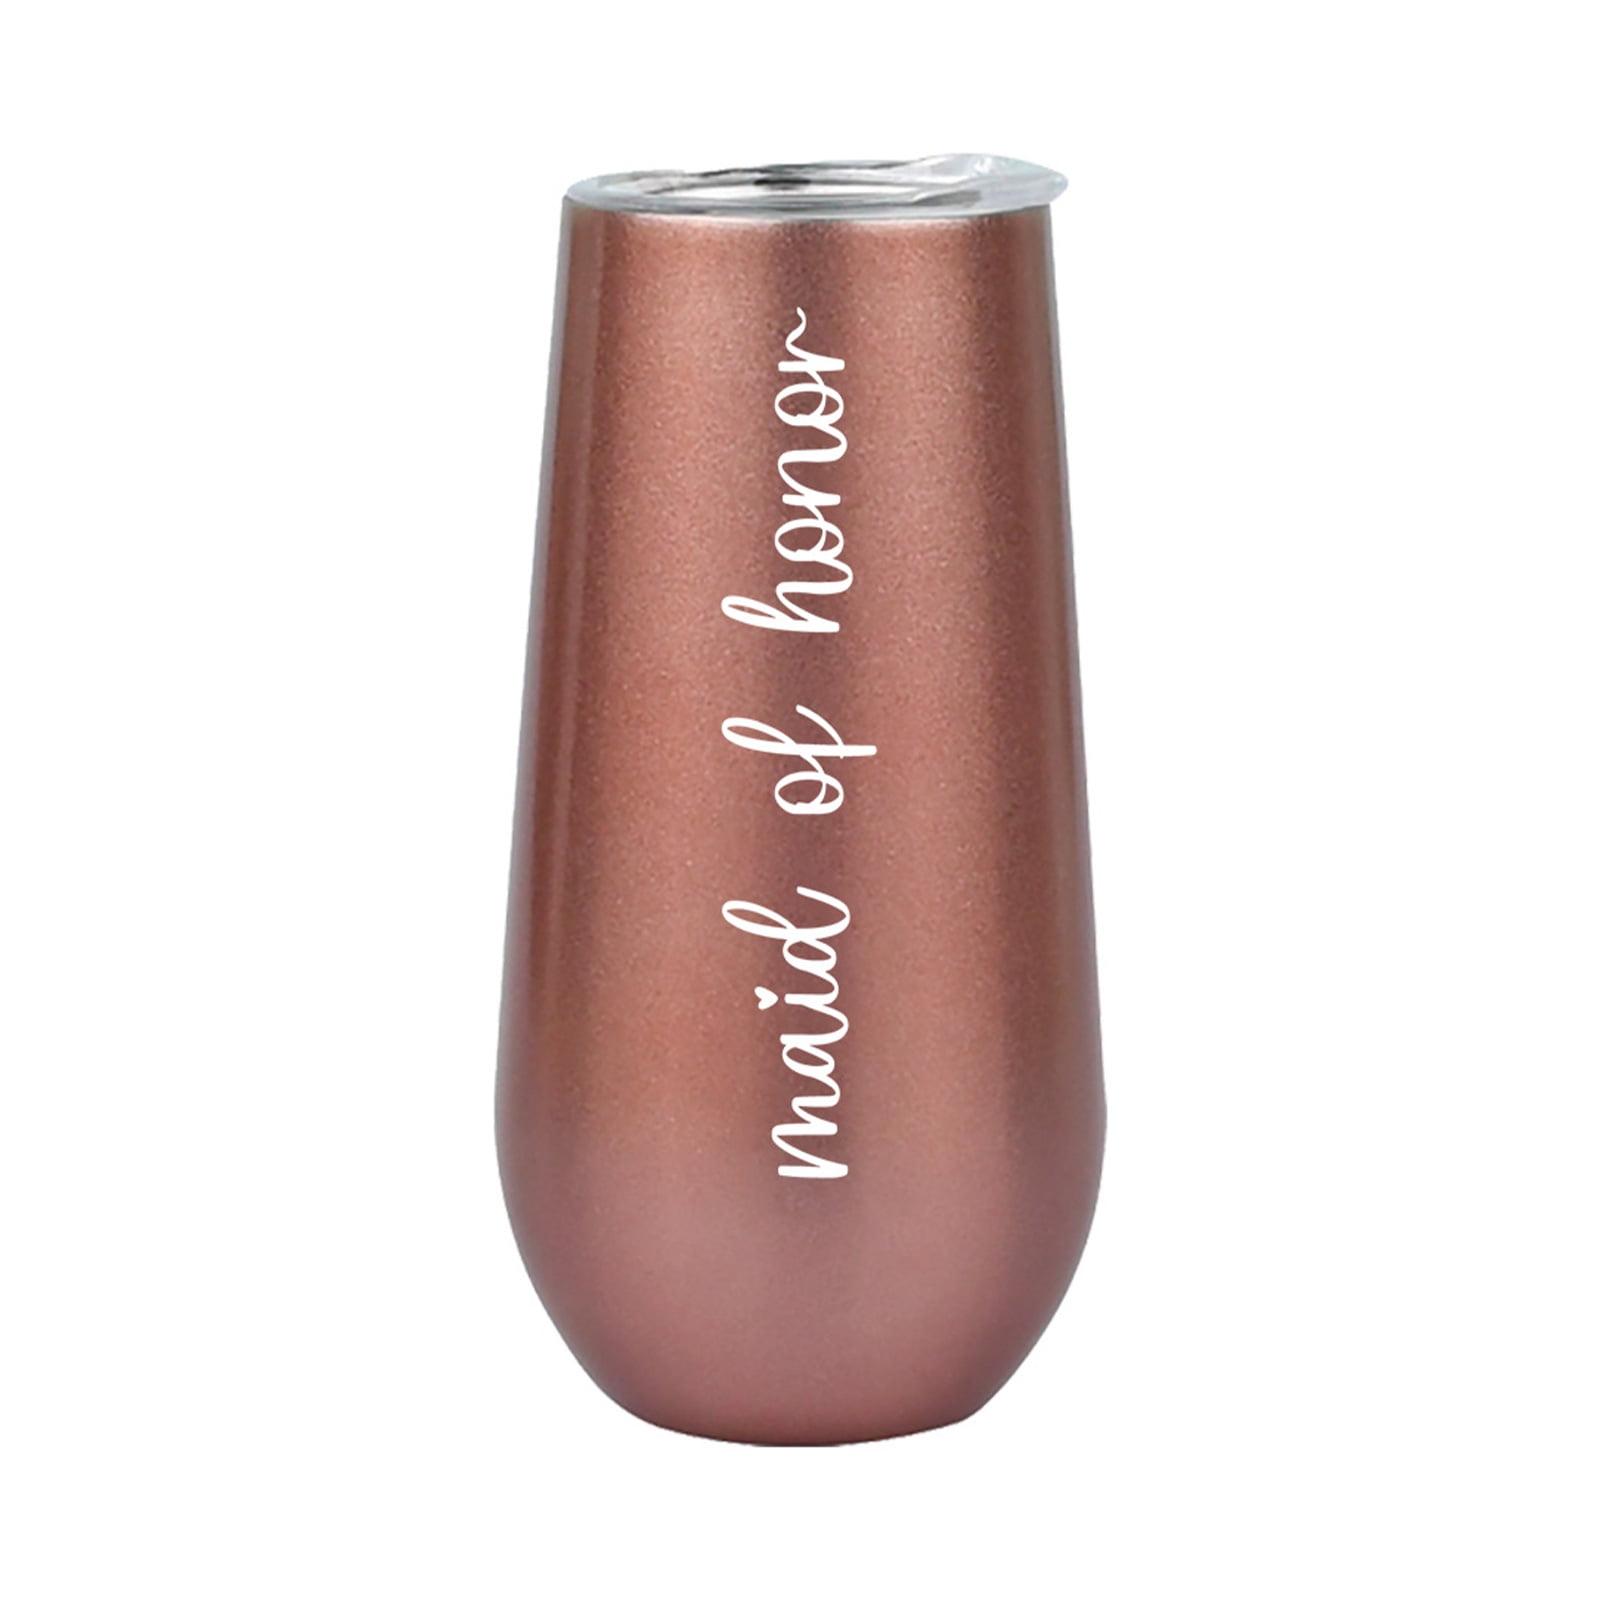 Champagne Flute Tumbler / Rose Gold and Diamond White Stainless